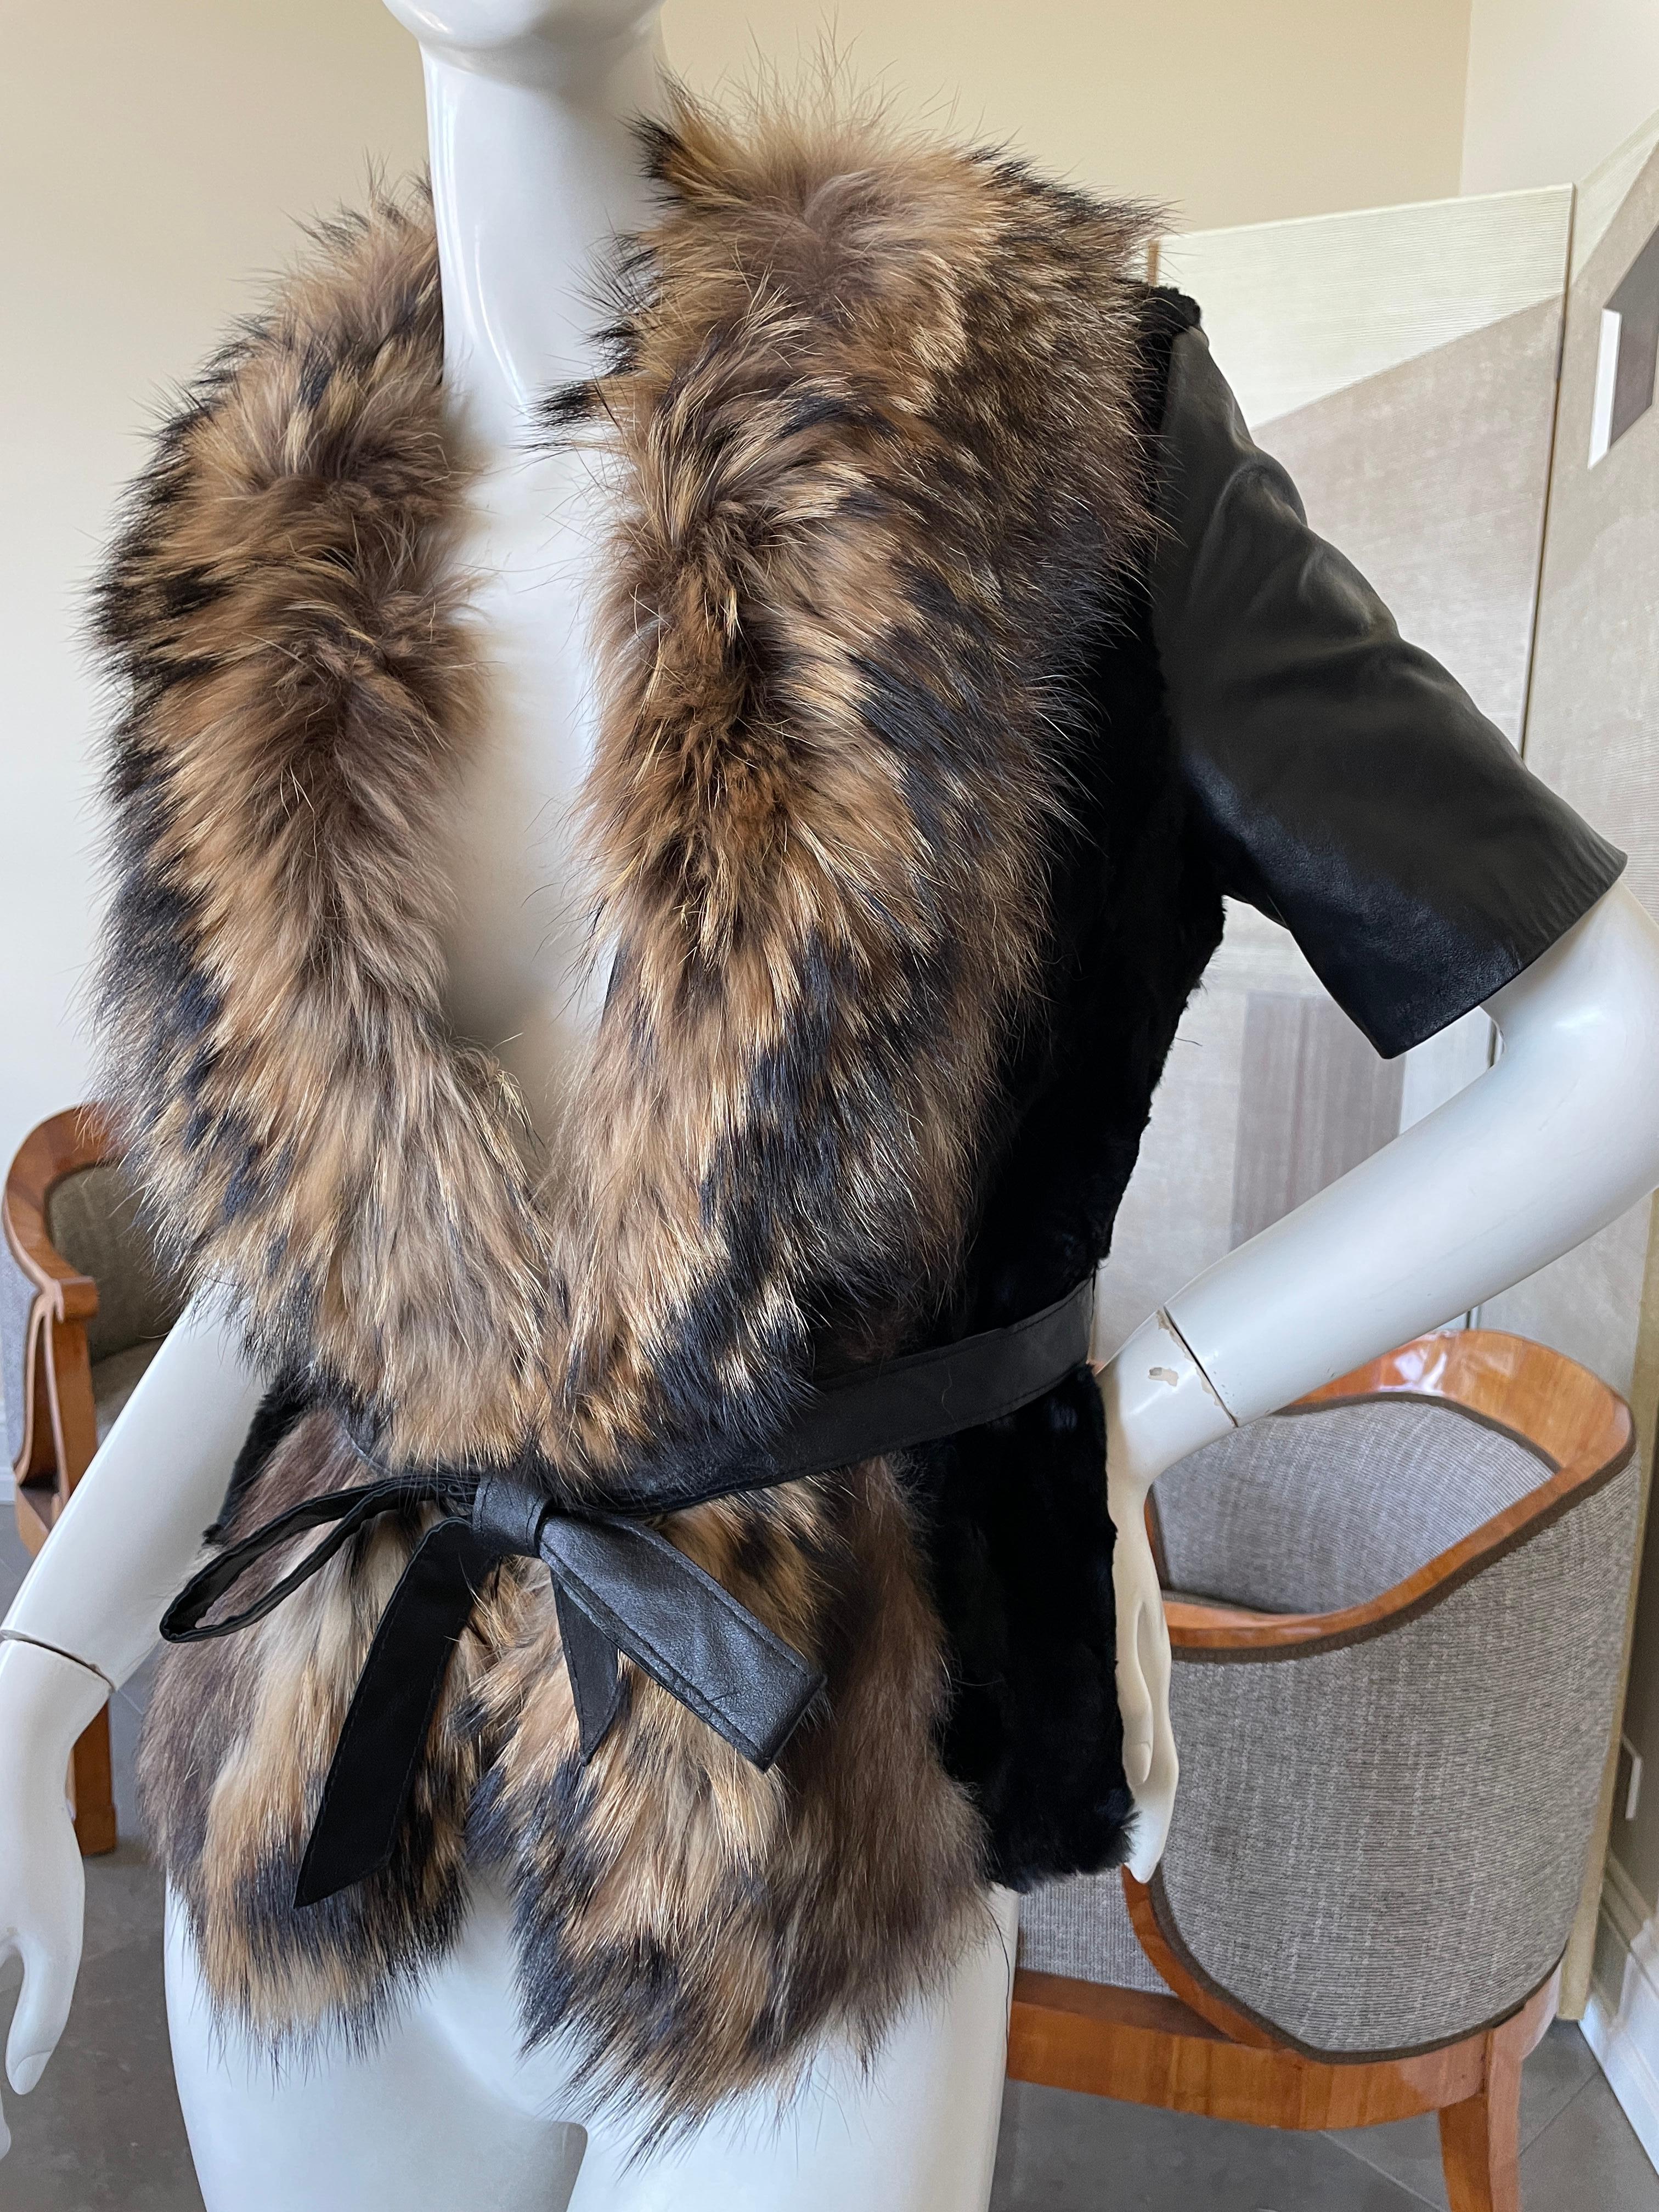 Roberto Cavalli Vintage Black Fur Short Jacket with Dramatic Fur Collar In Excellent Condition For Sale In Cloverdale, CA